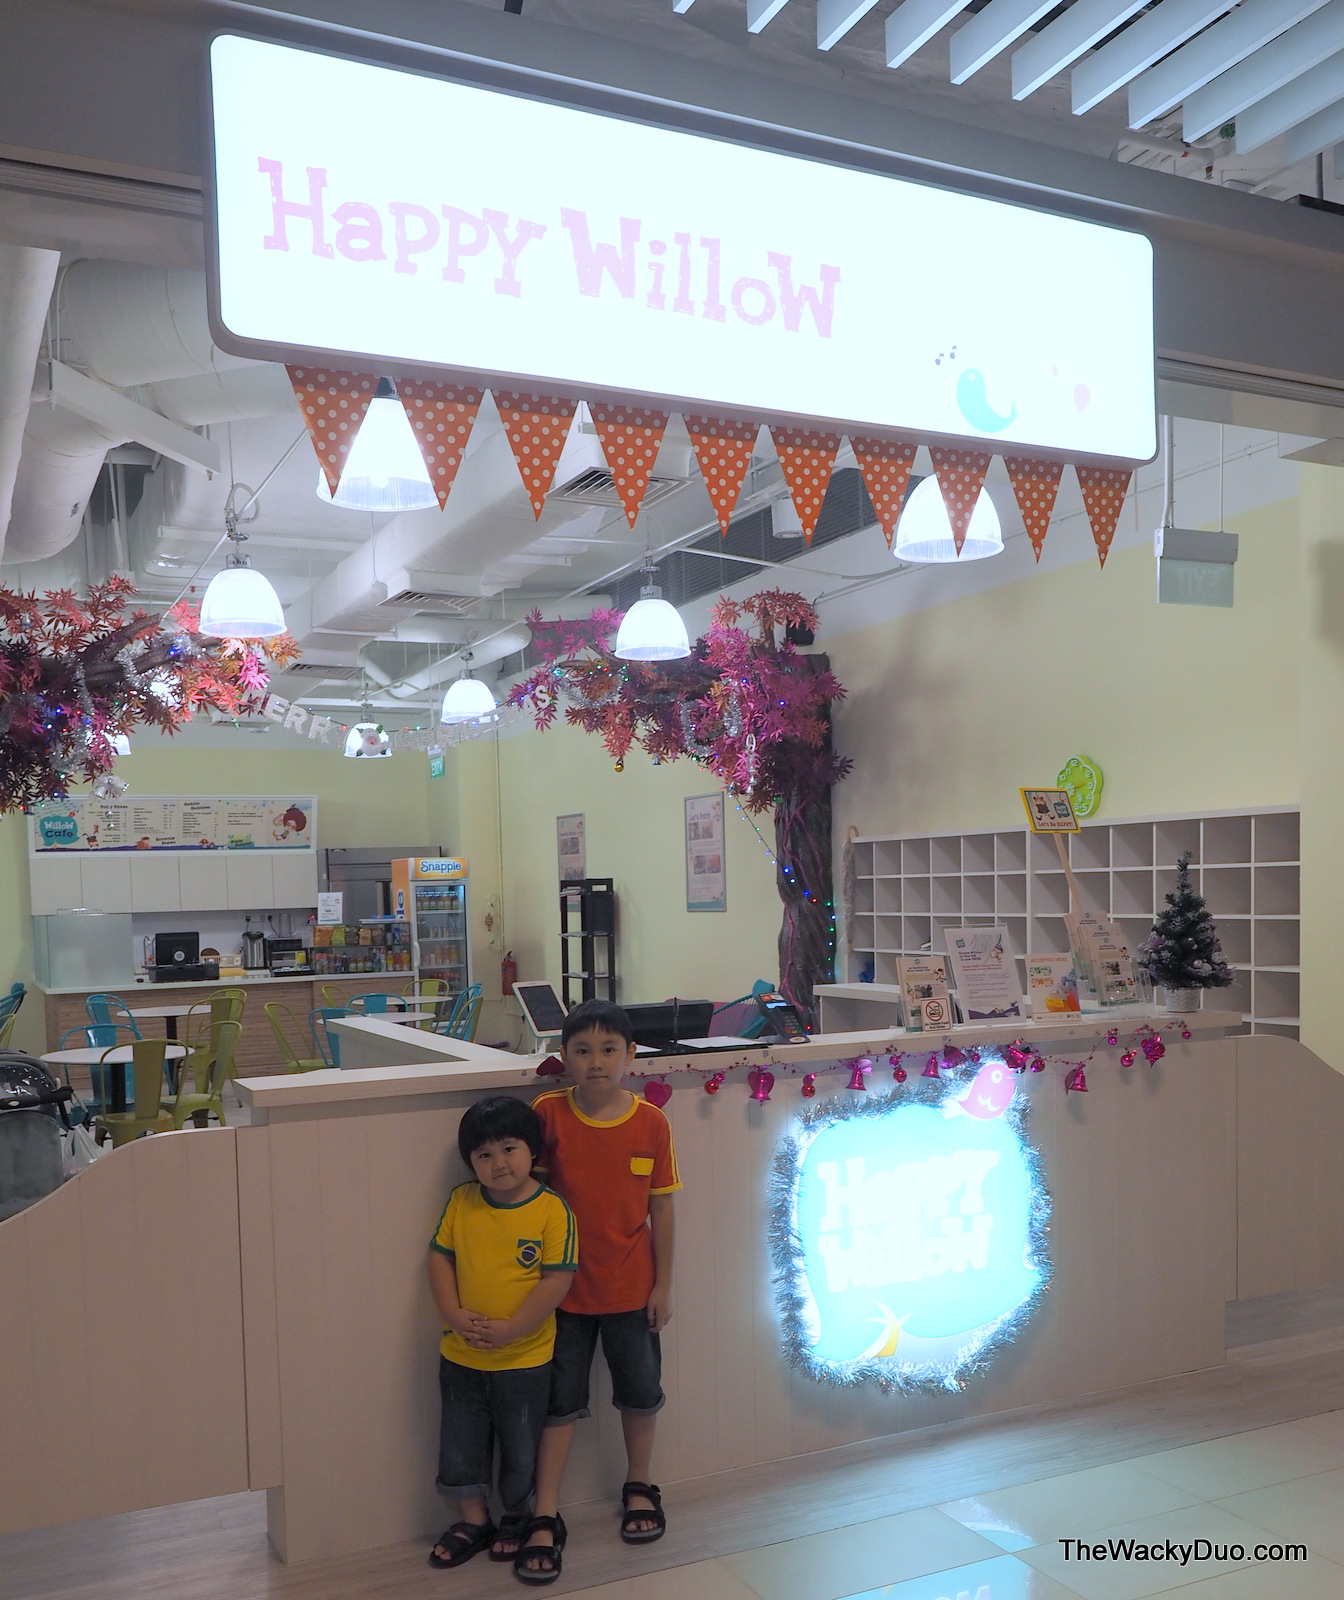 Happy Willow @ One KM Review and Giveaway